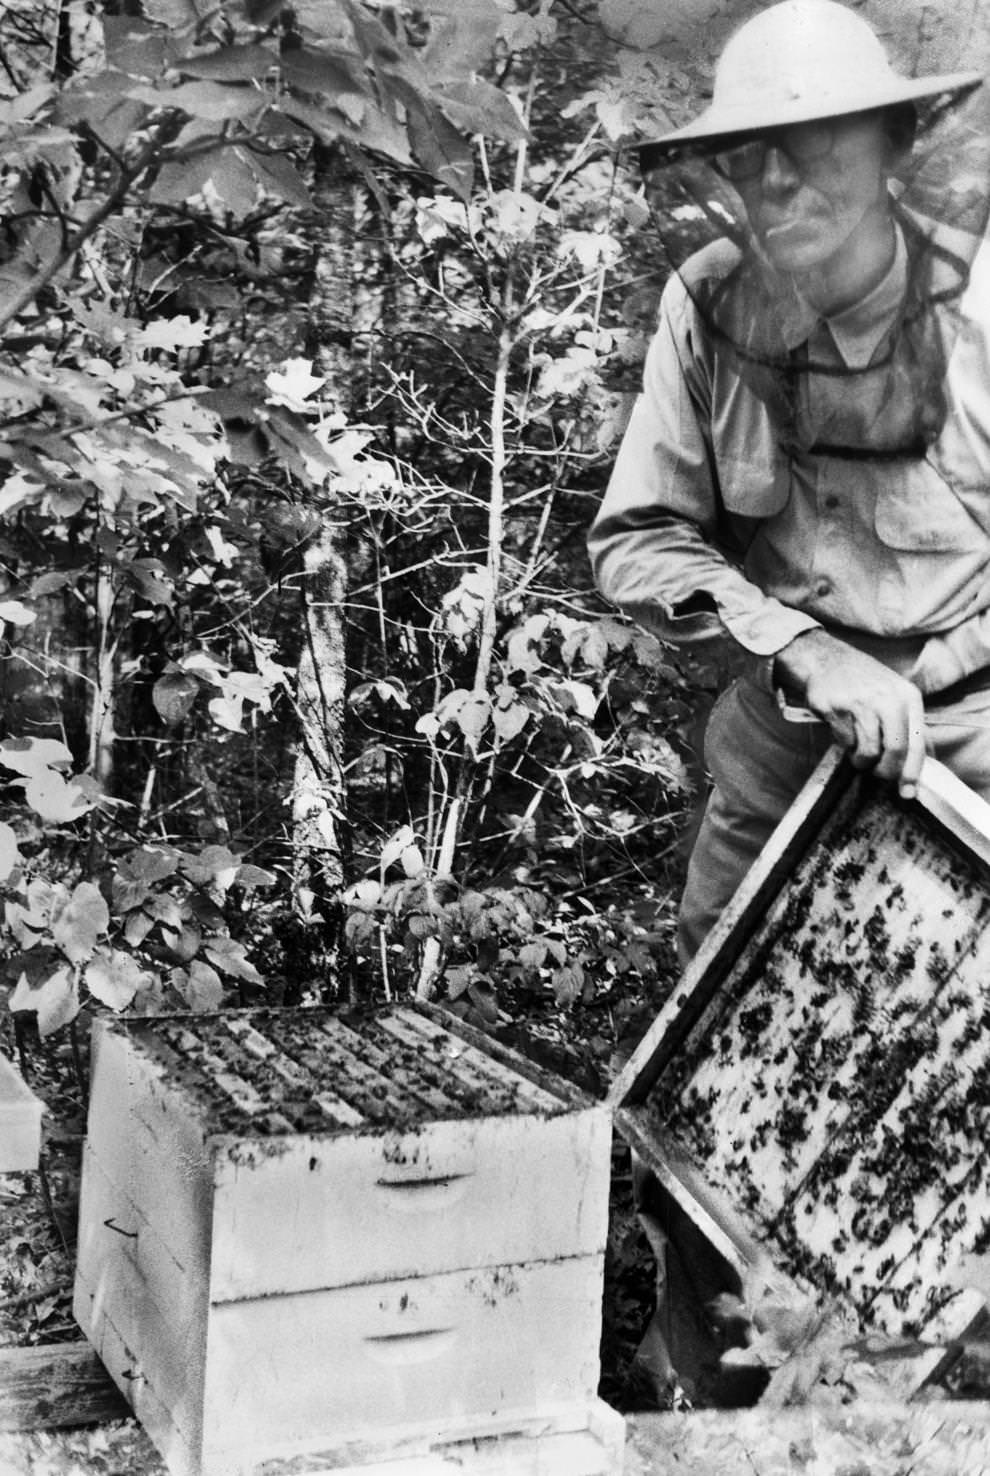 Farmer C.G. Maxwell of Pamplin, in the area of Appomattox and Prince Edward counties, showed the inside of a honeyless beehive, 1963.